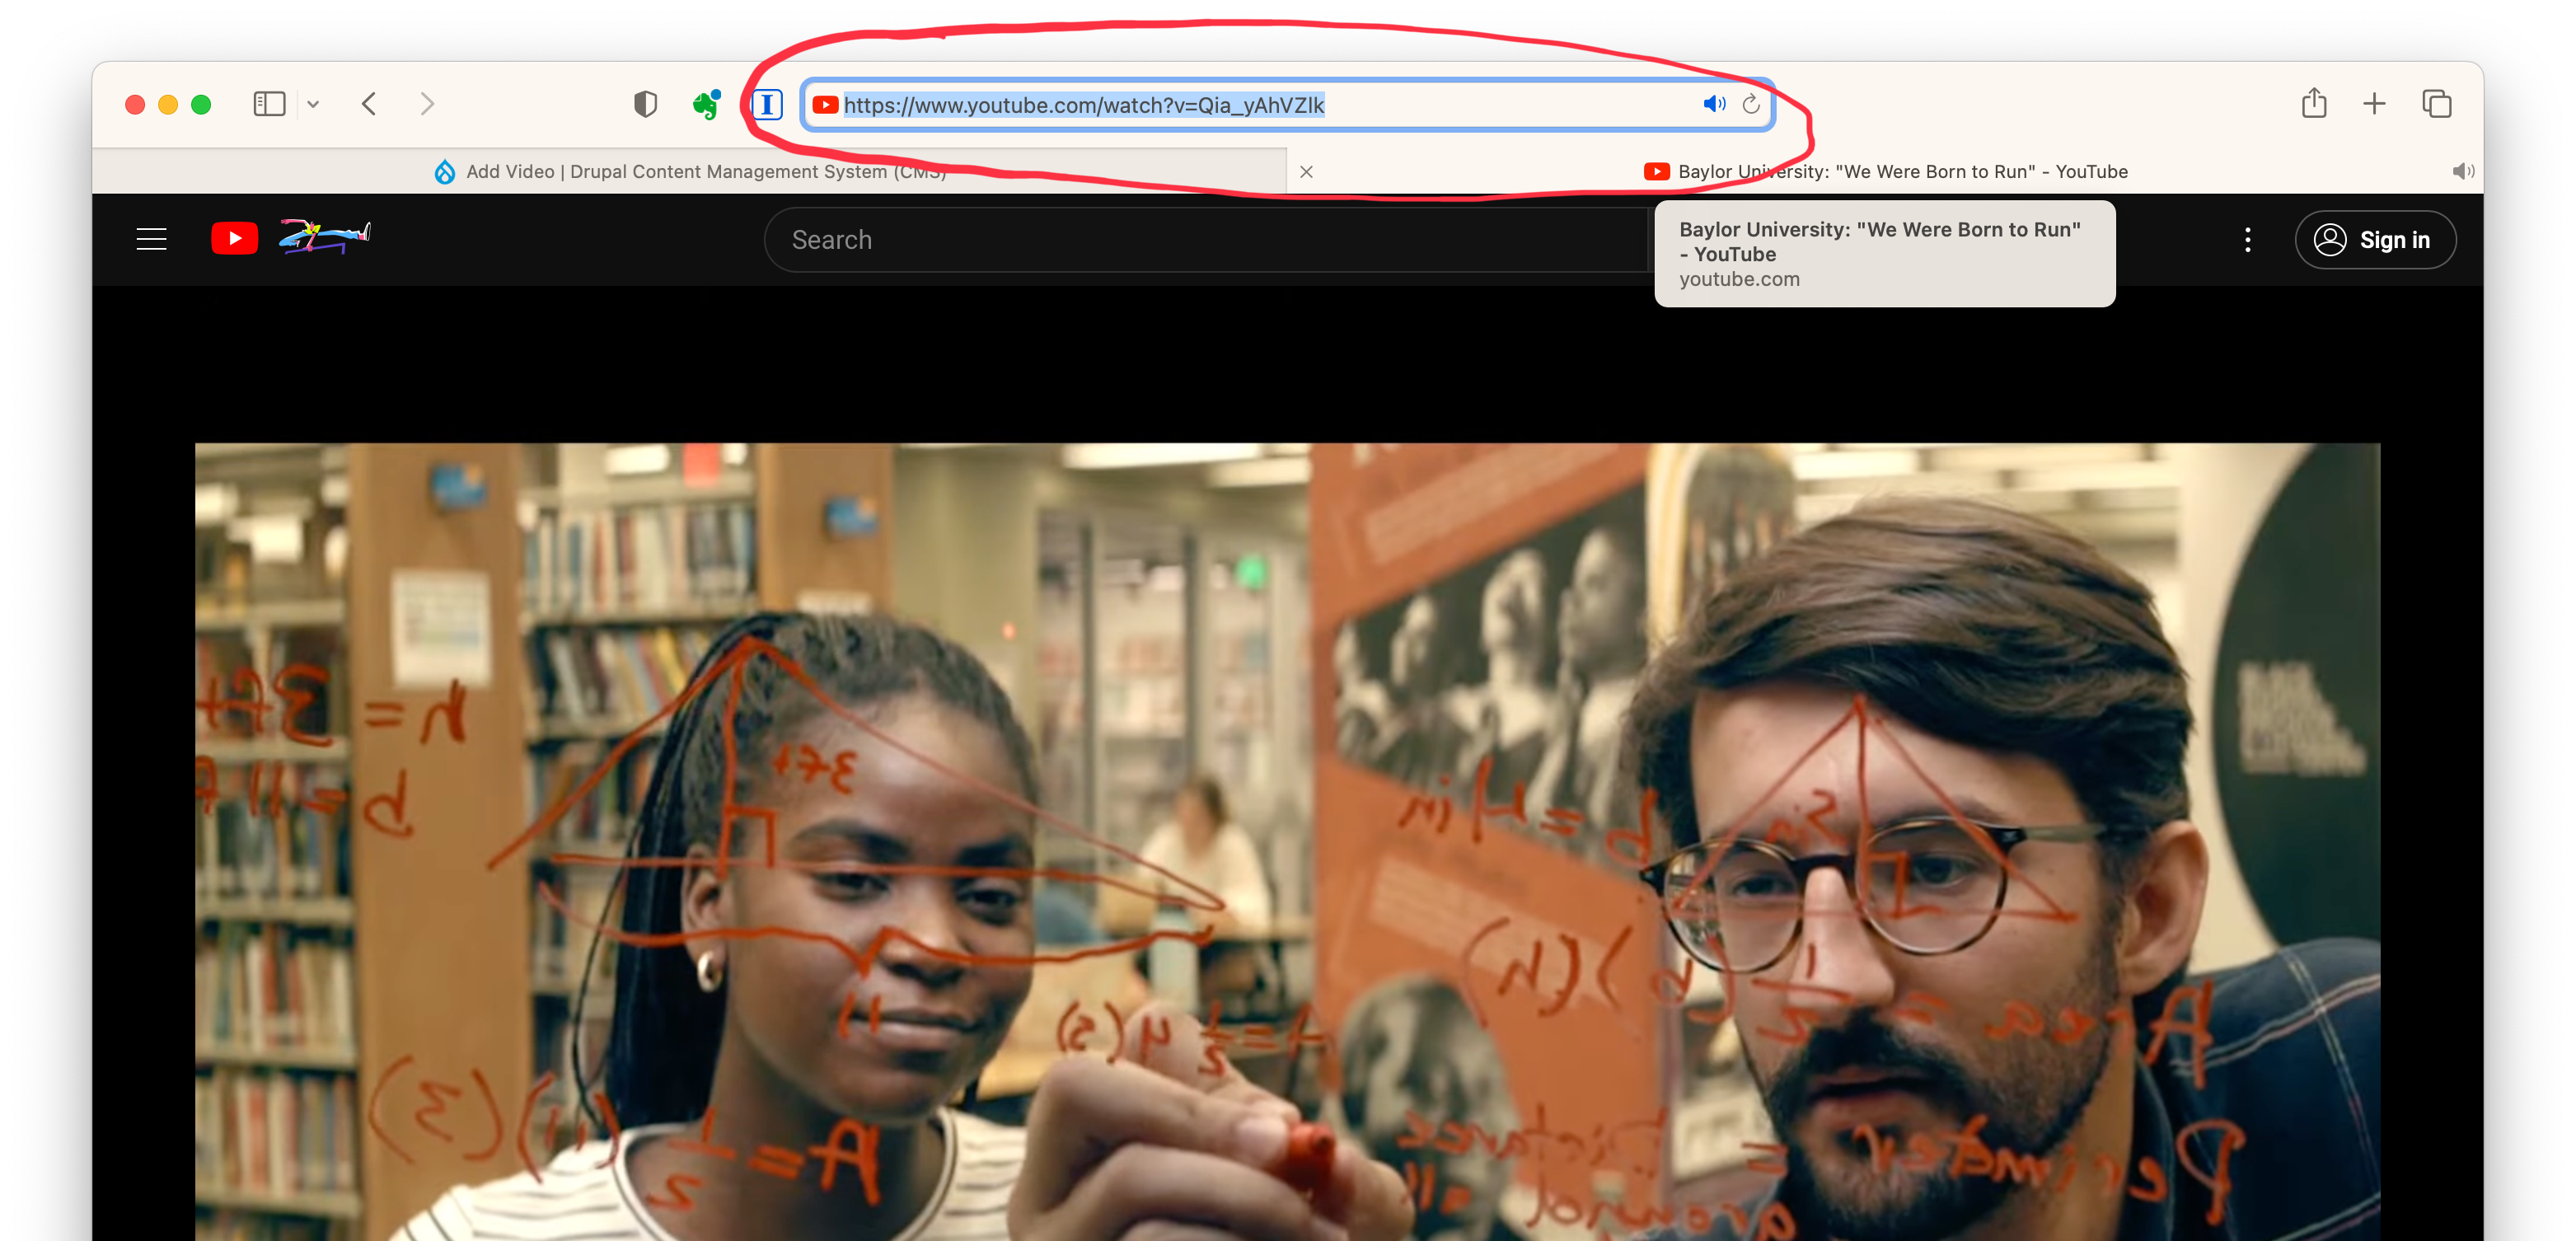 Screen capture from YouTube and Safari indicating the location of the address bar.